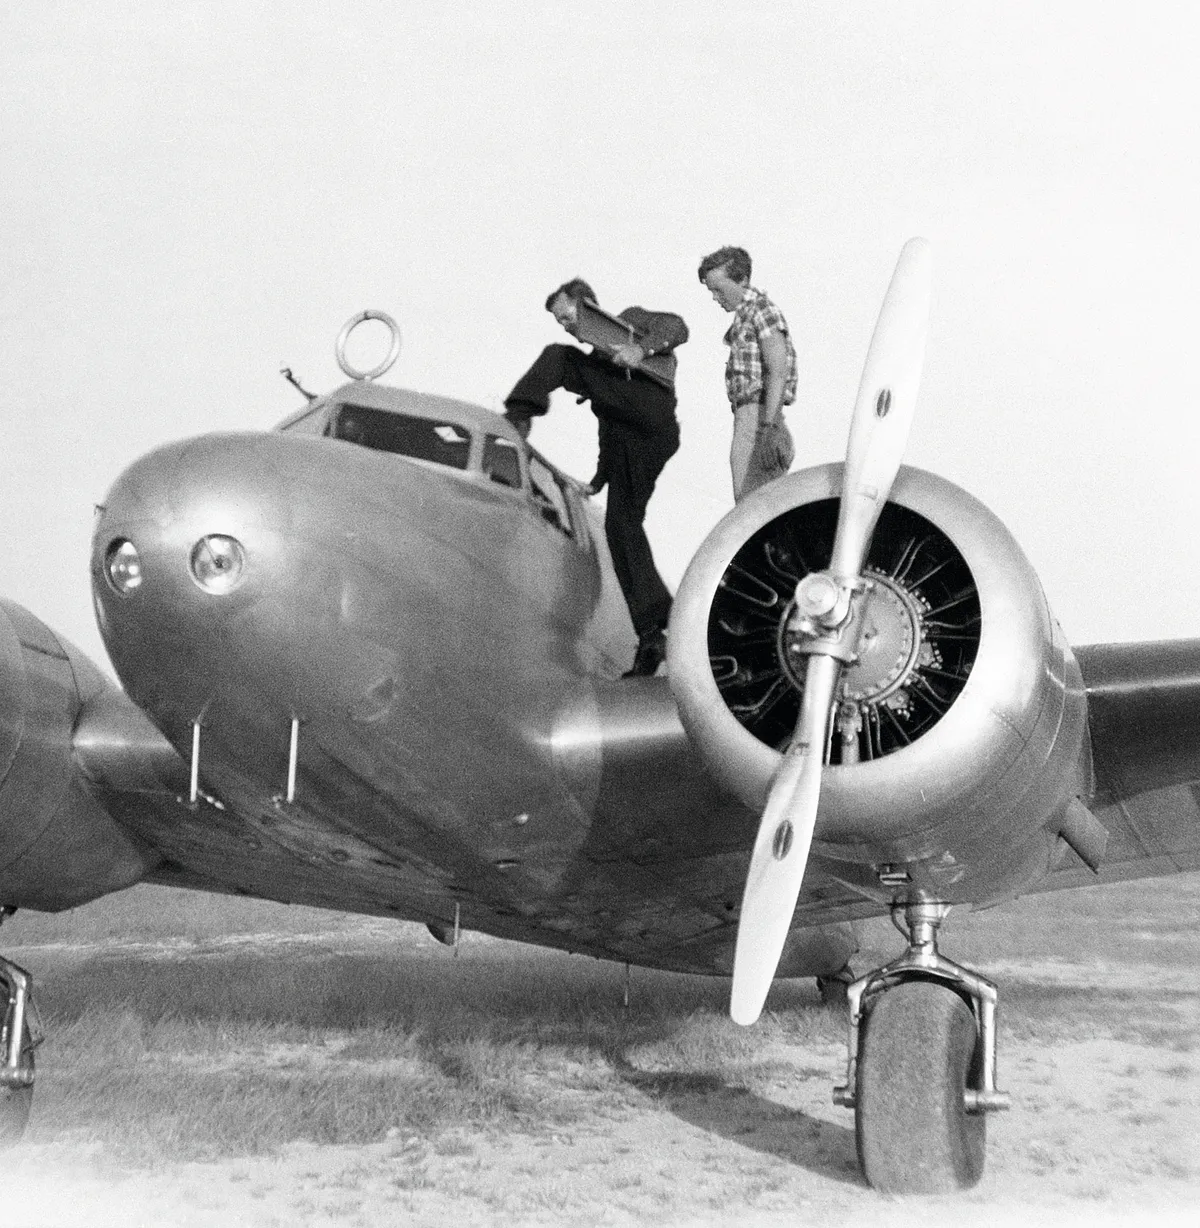 A black and white image of Amelia Earhart and her navigator Fred Noonan boarding a plane